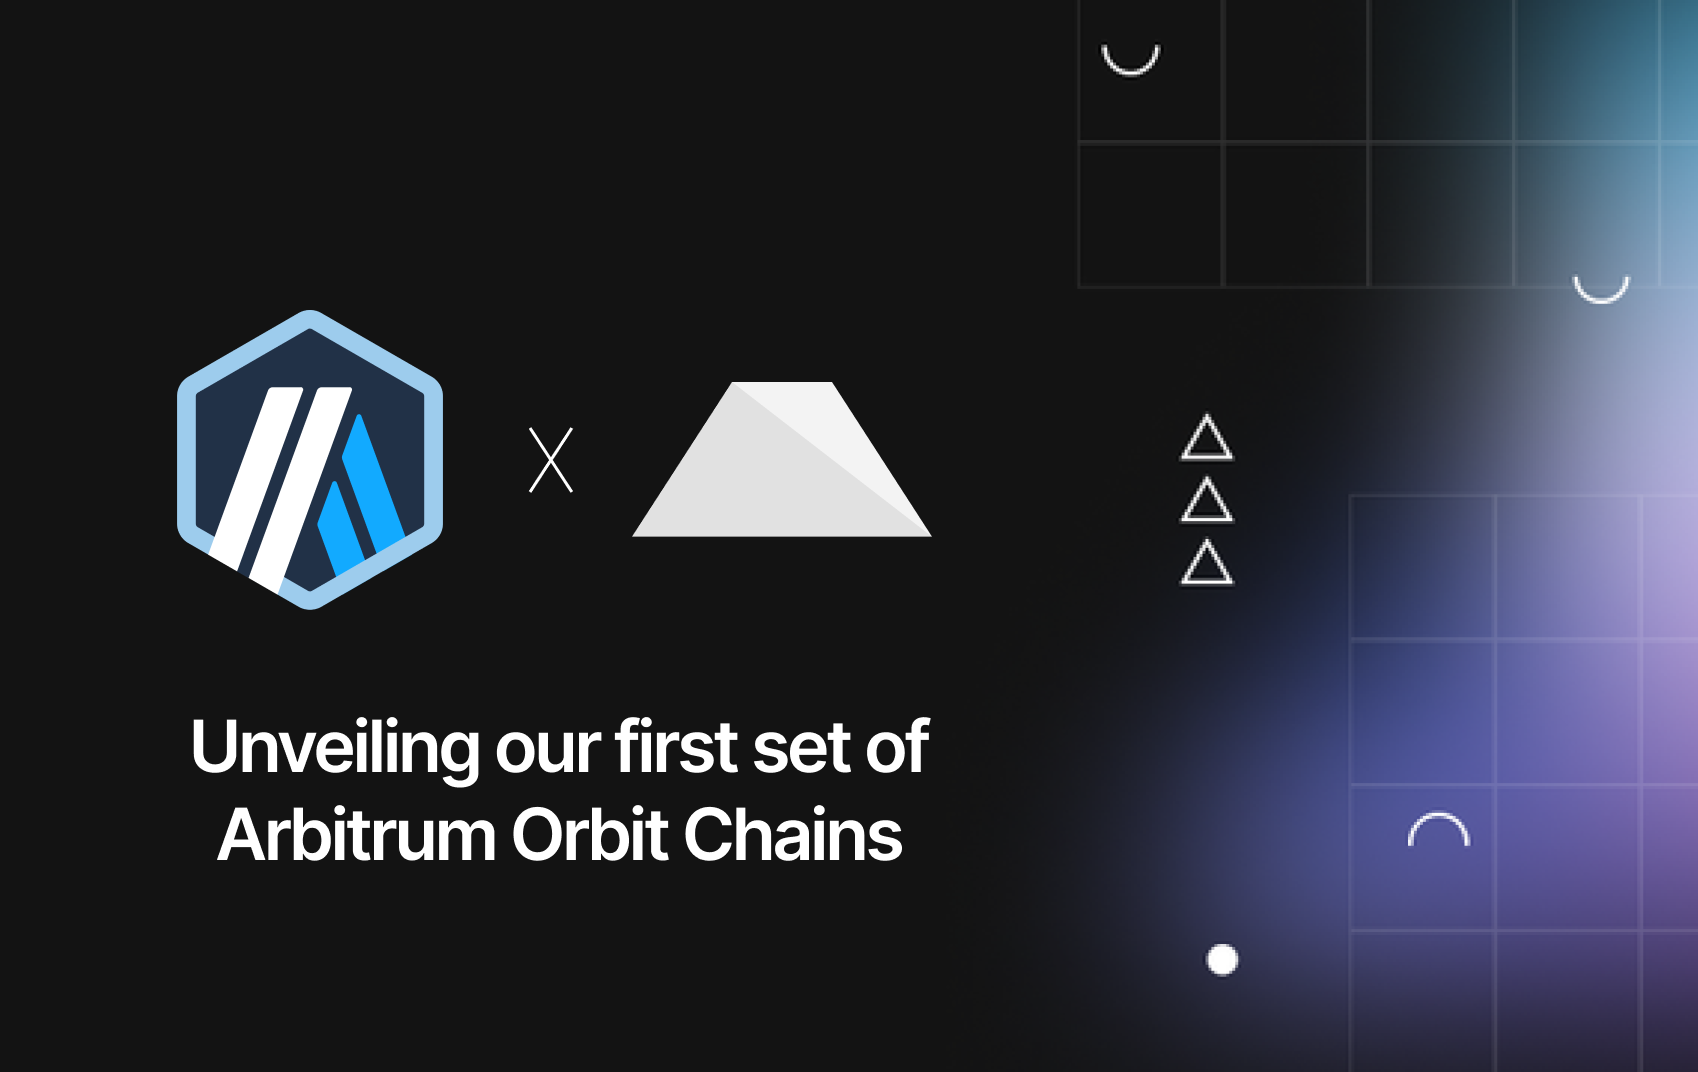 Unveiling our first set of Arbitrum Orbit Chains